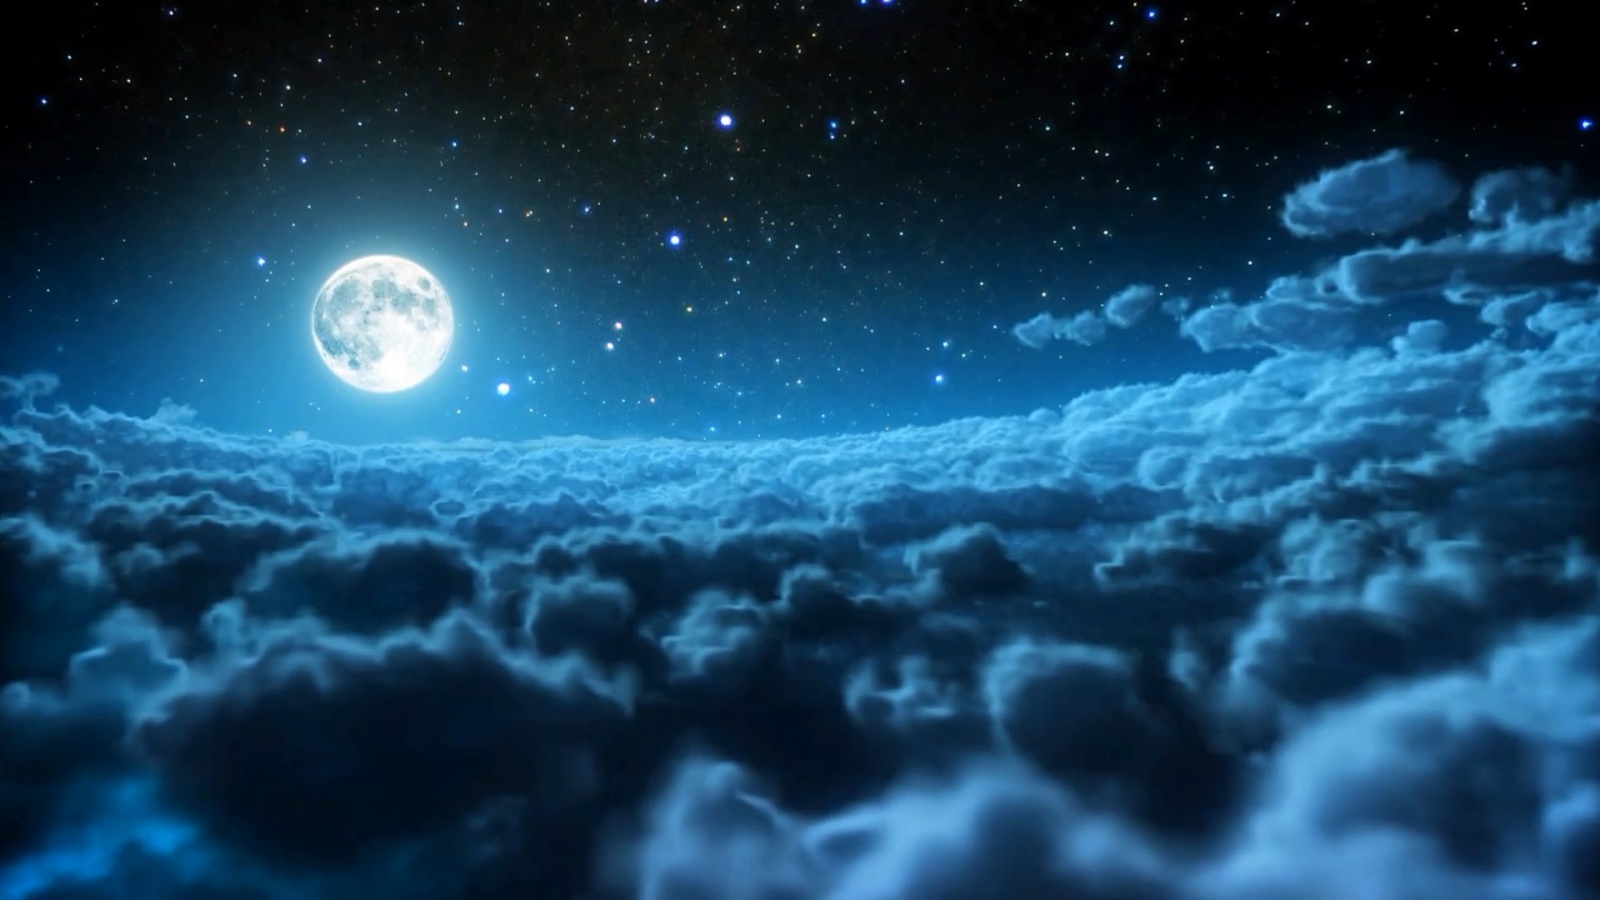 Beauty Night Sky With Moon Important Wallpapers